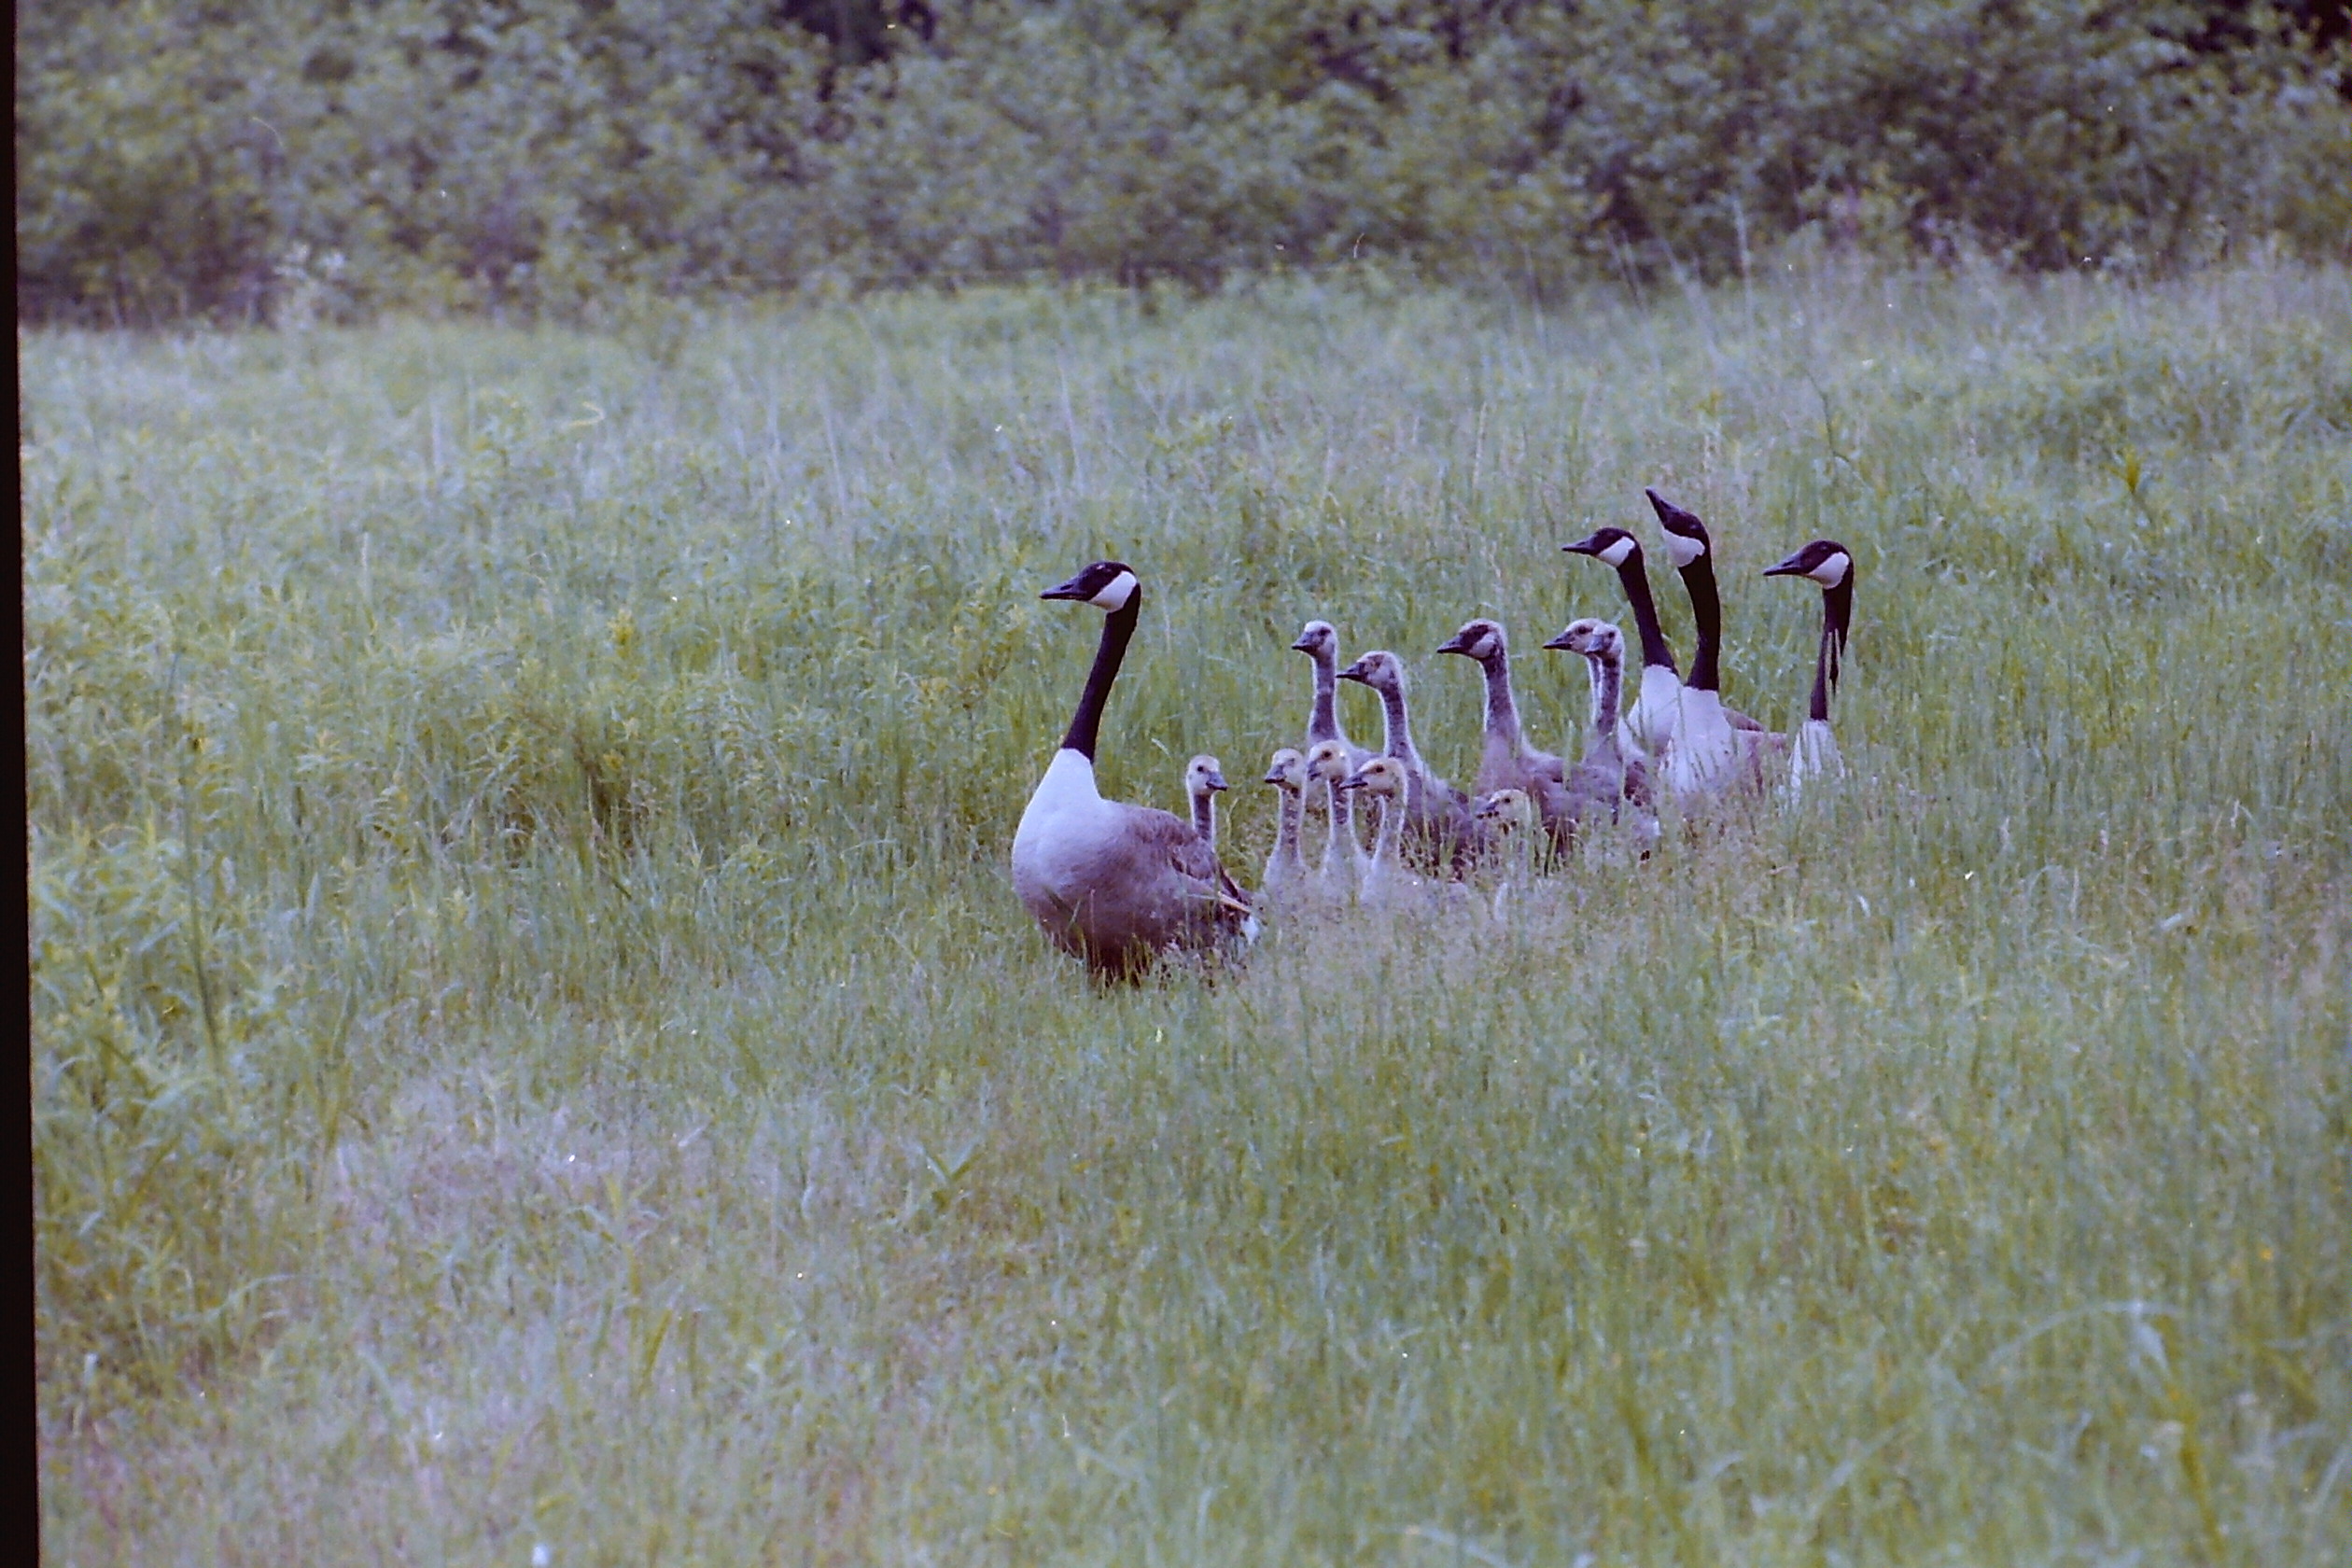 Geese with young at the release site later in 1992 